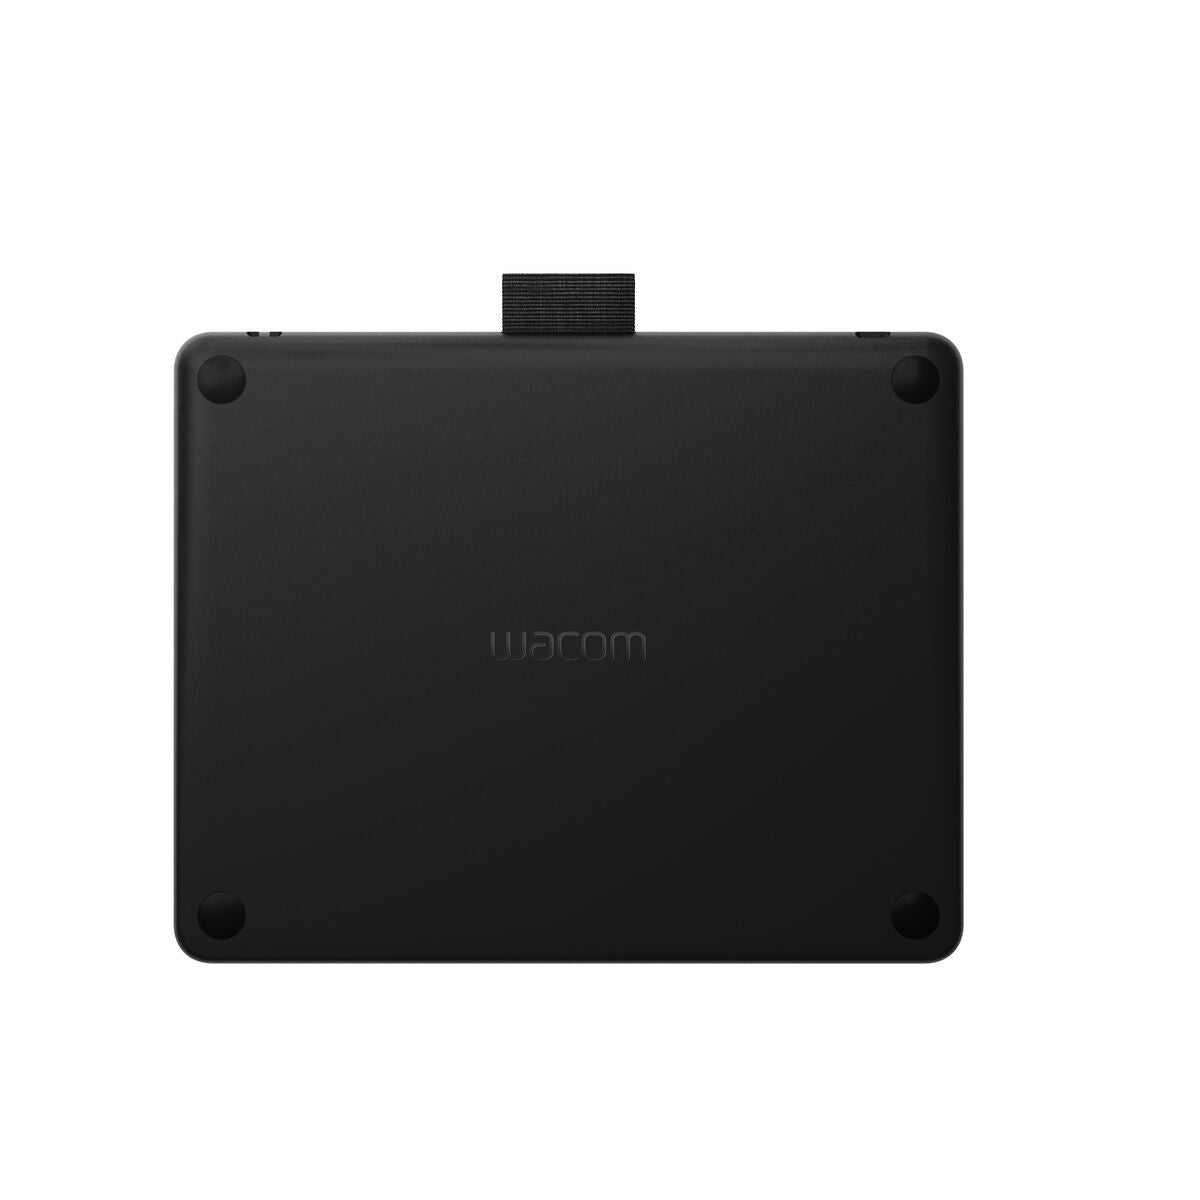 Graphics tablets and pens Wacom CTL-4100WLK-S, Wacom, Computing, Accessories, graphics-tablets-and-pens-wacom-ctl-4100wlk-s, Brand_Wacom, category-reference-2609, category-reference-2803, category-reference-2812, category-reference-t-19685, category-reference-t-19908, category-reference-t-21353, computers / components, Condition_NEW, Price_100 - 200, Teleworking, RiotNook